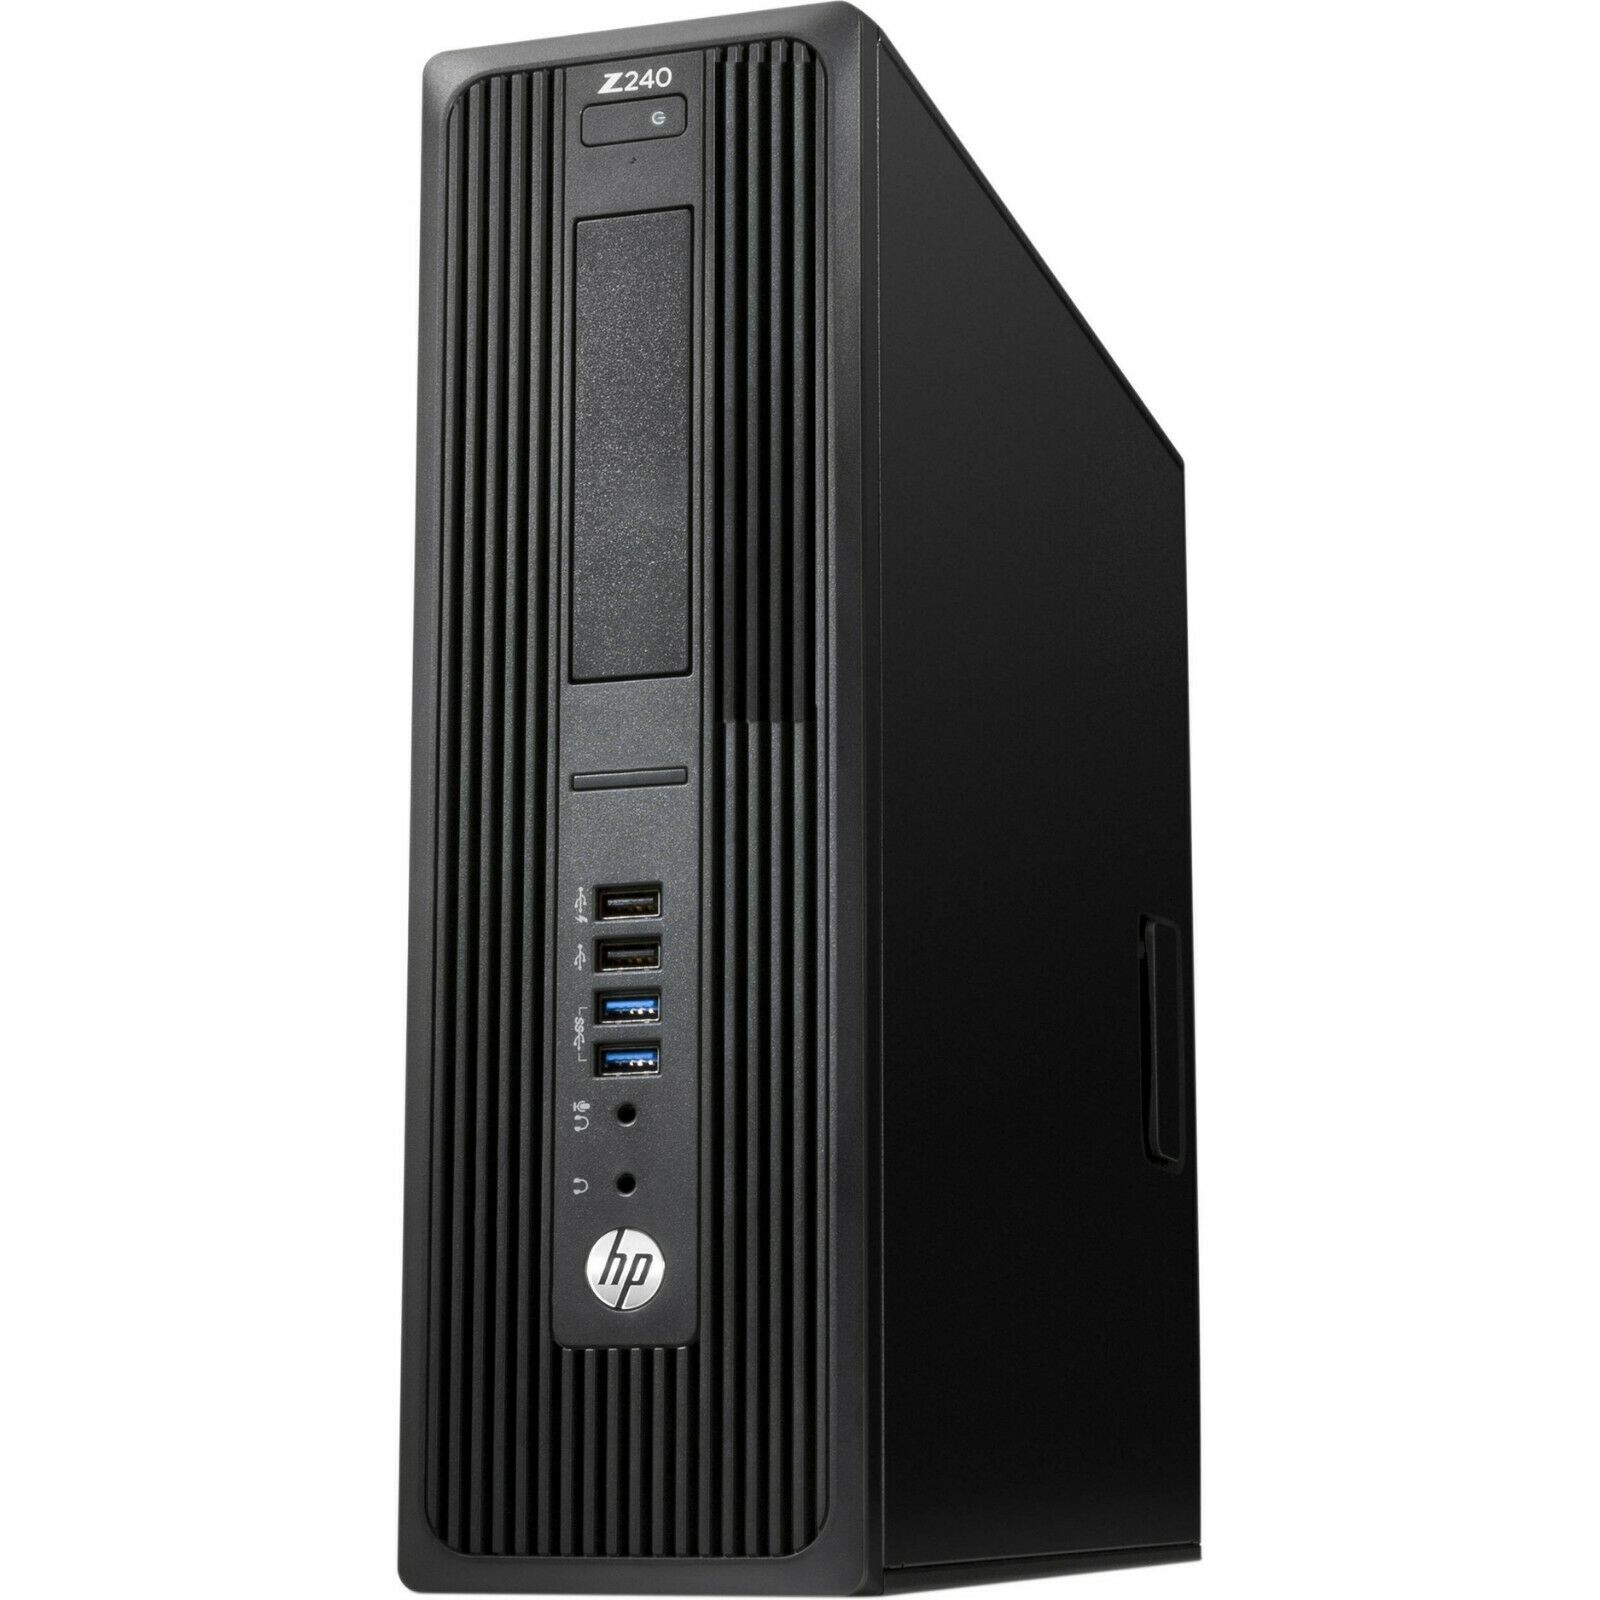 Restored Gaming HP Z240 Workstation SFF Computer Core i5 6th 3.4GHz, 16GB Ram, 500GB HDD, 240GB M.2 SSD, NVIDIA GT 730, New 22" LCD, Keyboard and Mouse, Wi-Fi, Win10 Home Desktop PC (Refurbished) - image 3 of 12